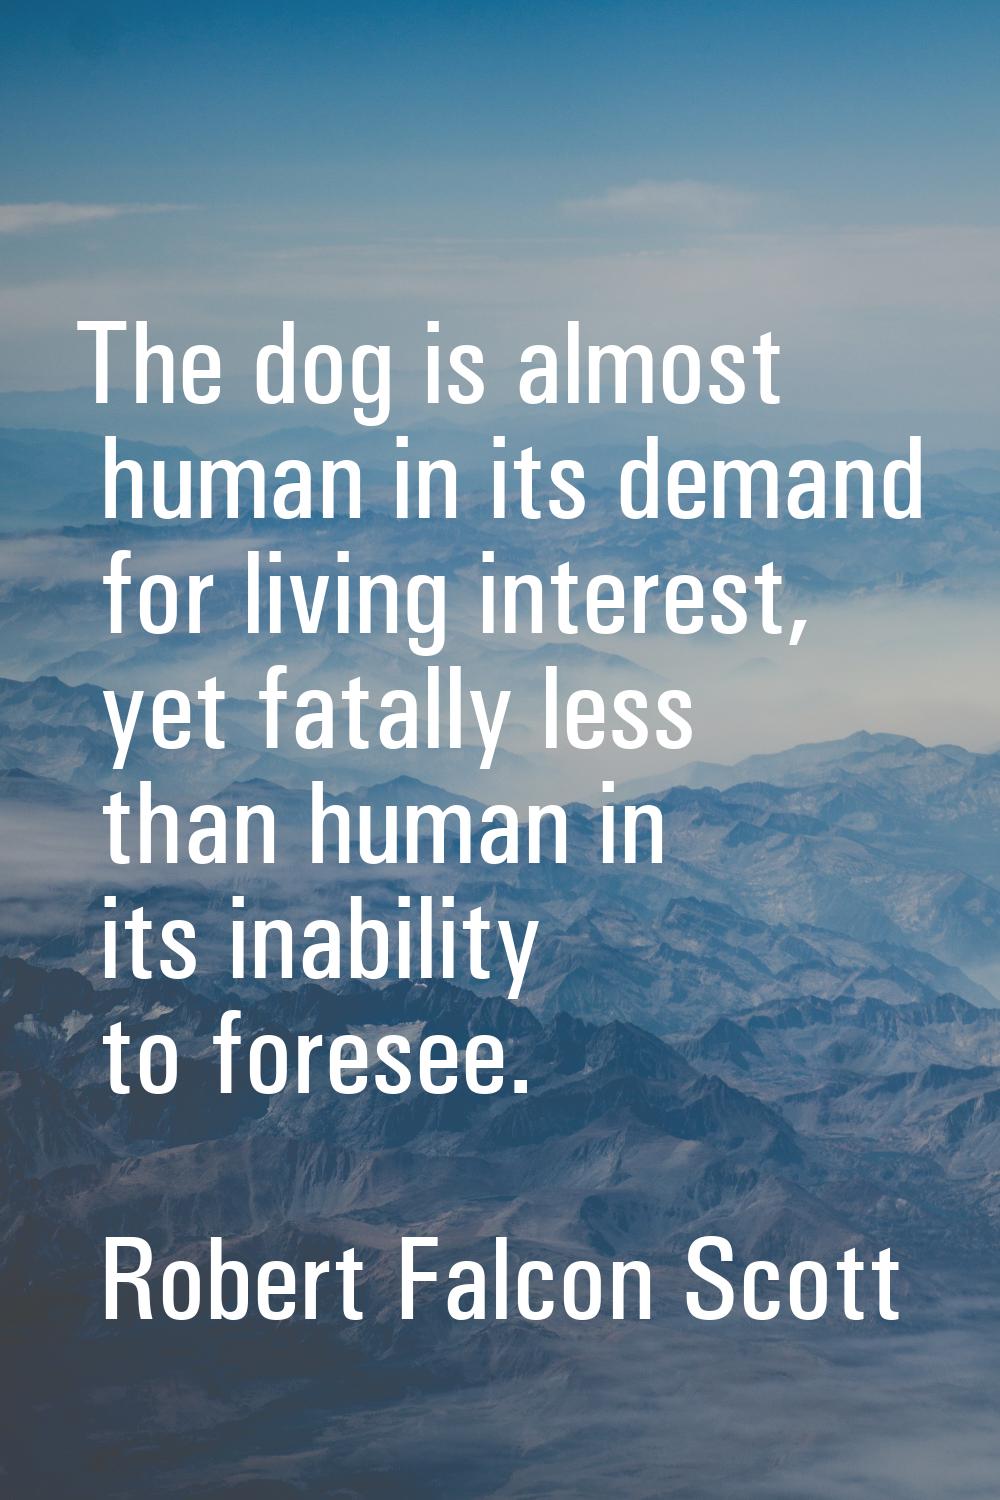 The dog is almost human in its demand for living interest, yet fatally less than human in its inabi